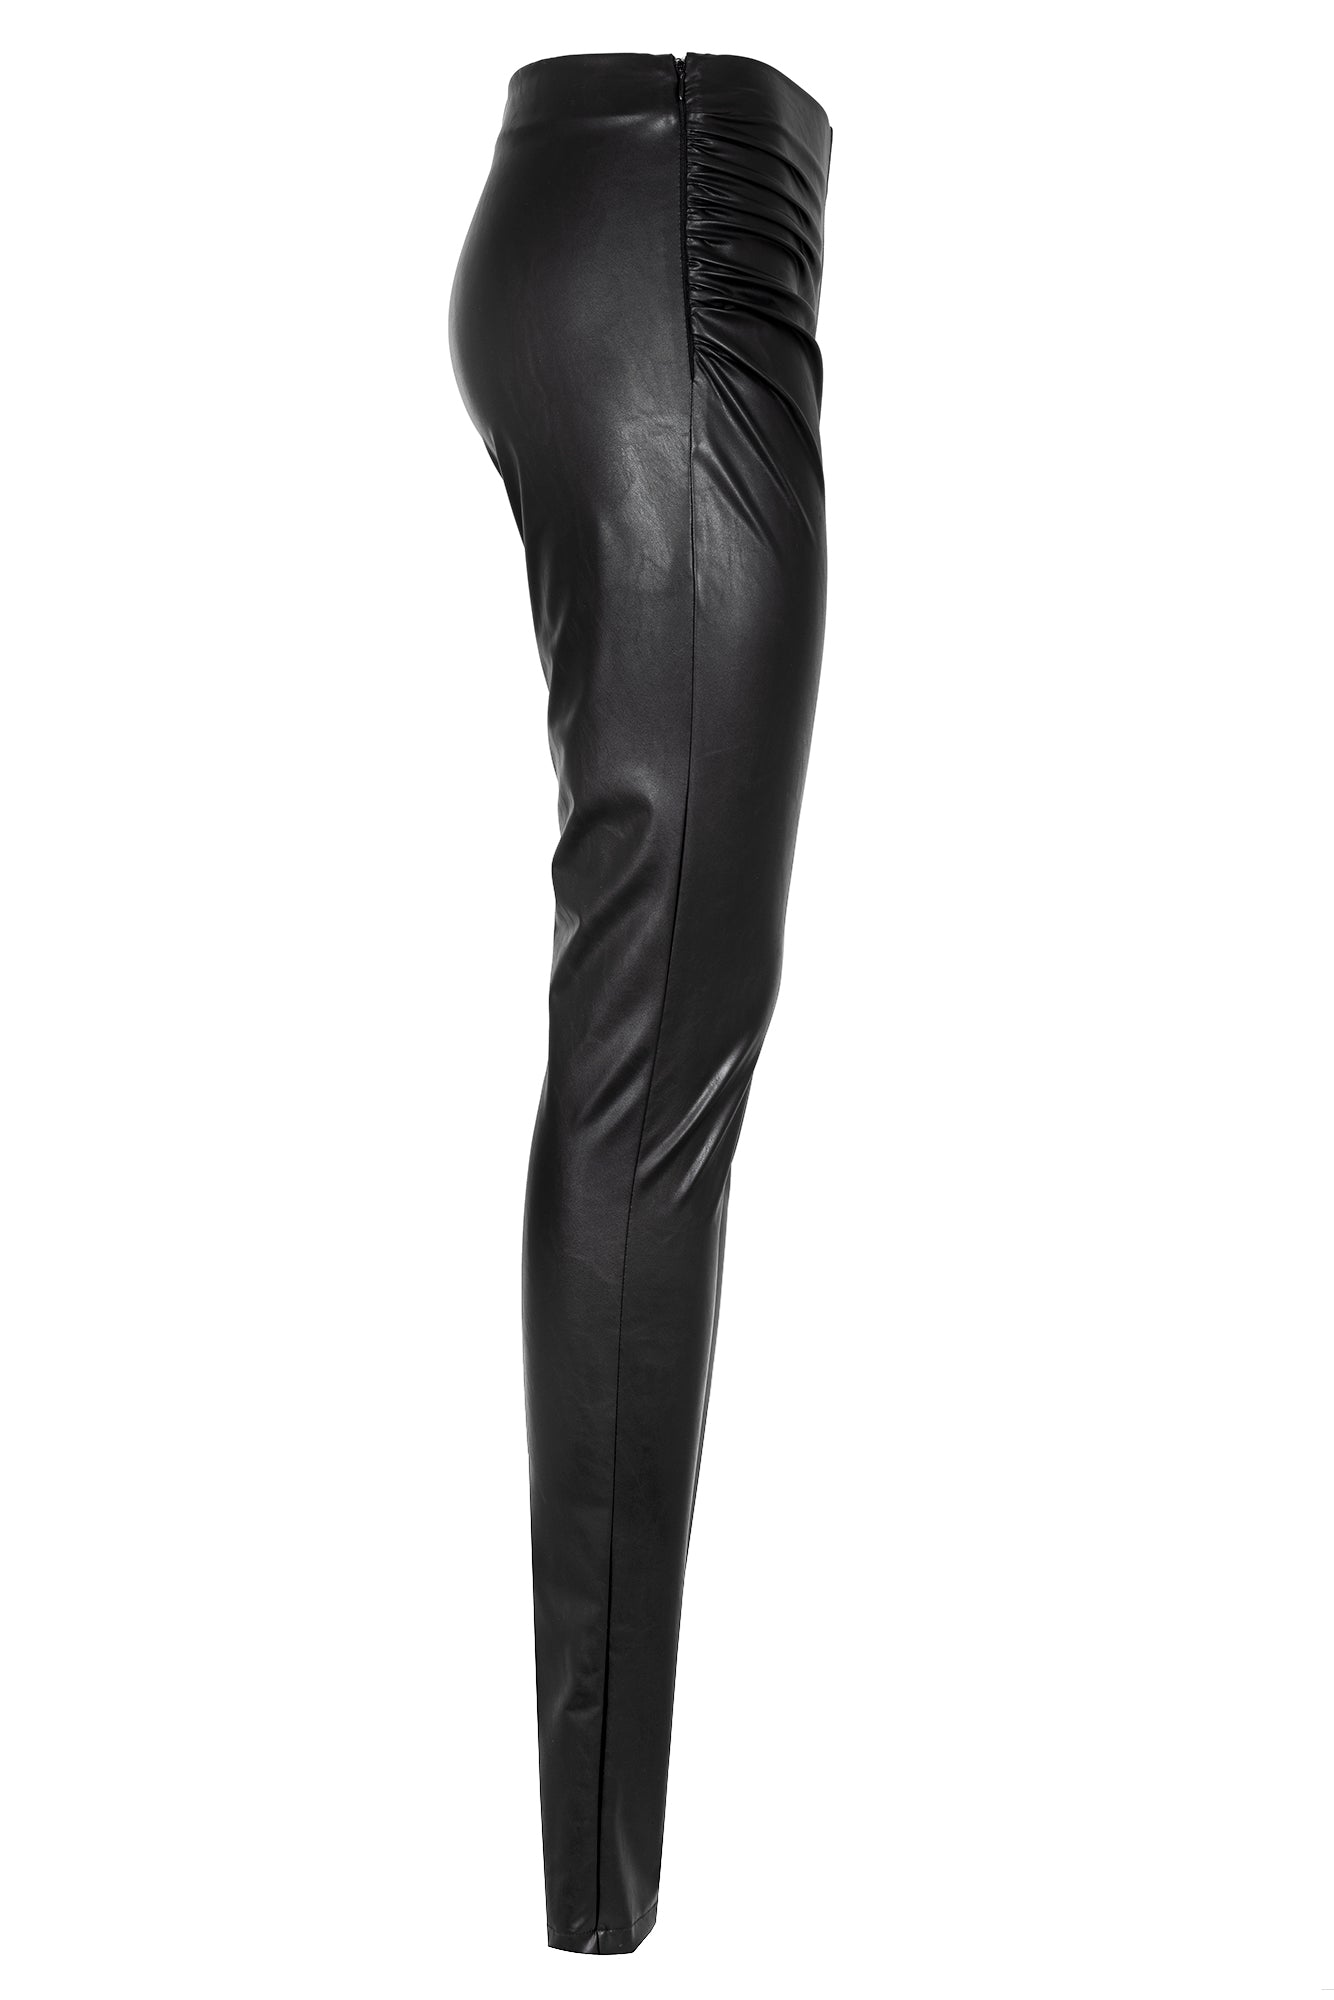 Faux leather skinny trousers gathered at the hips